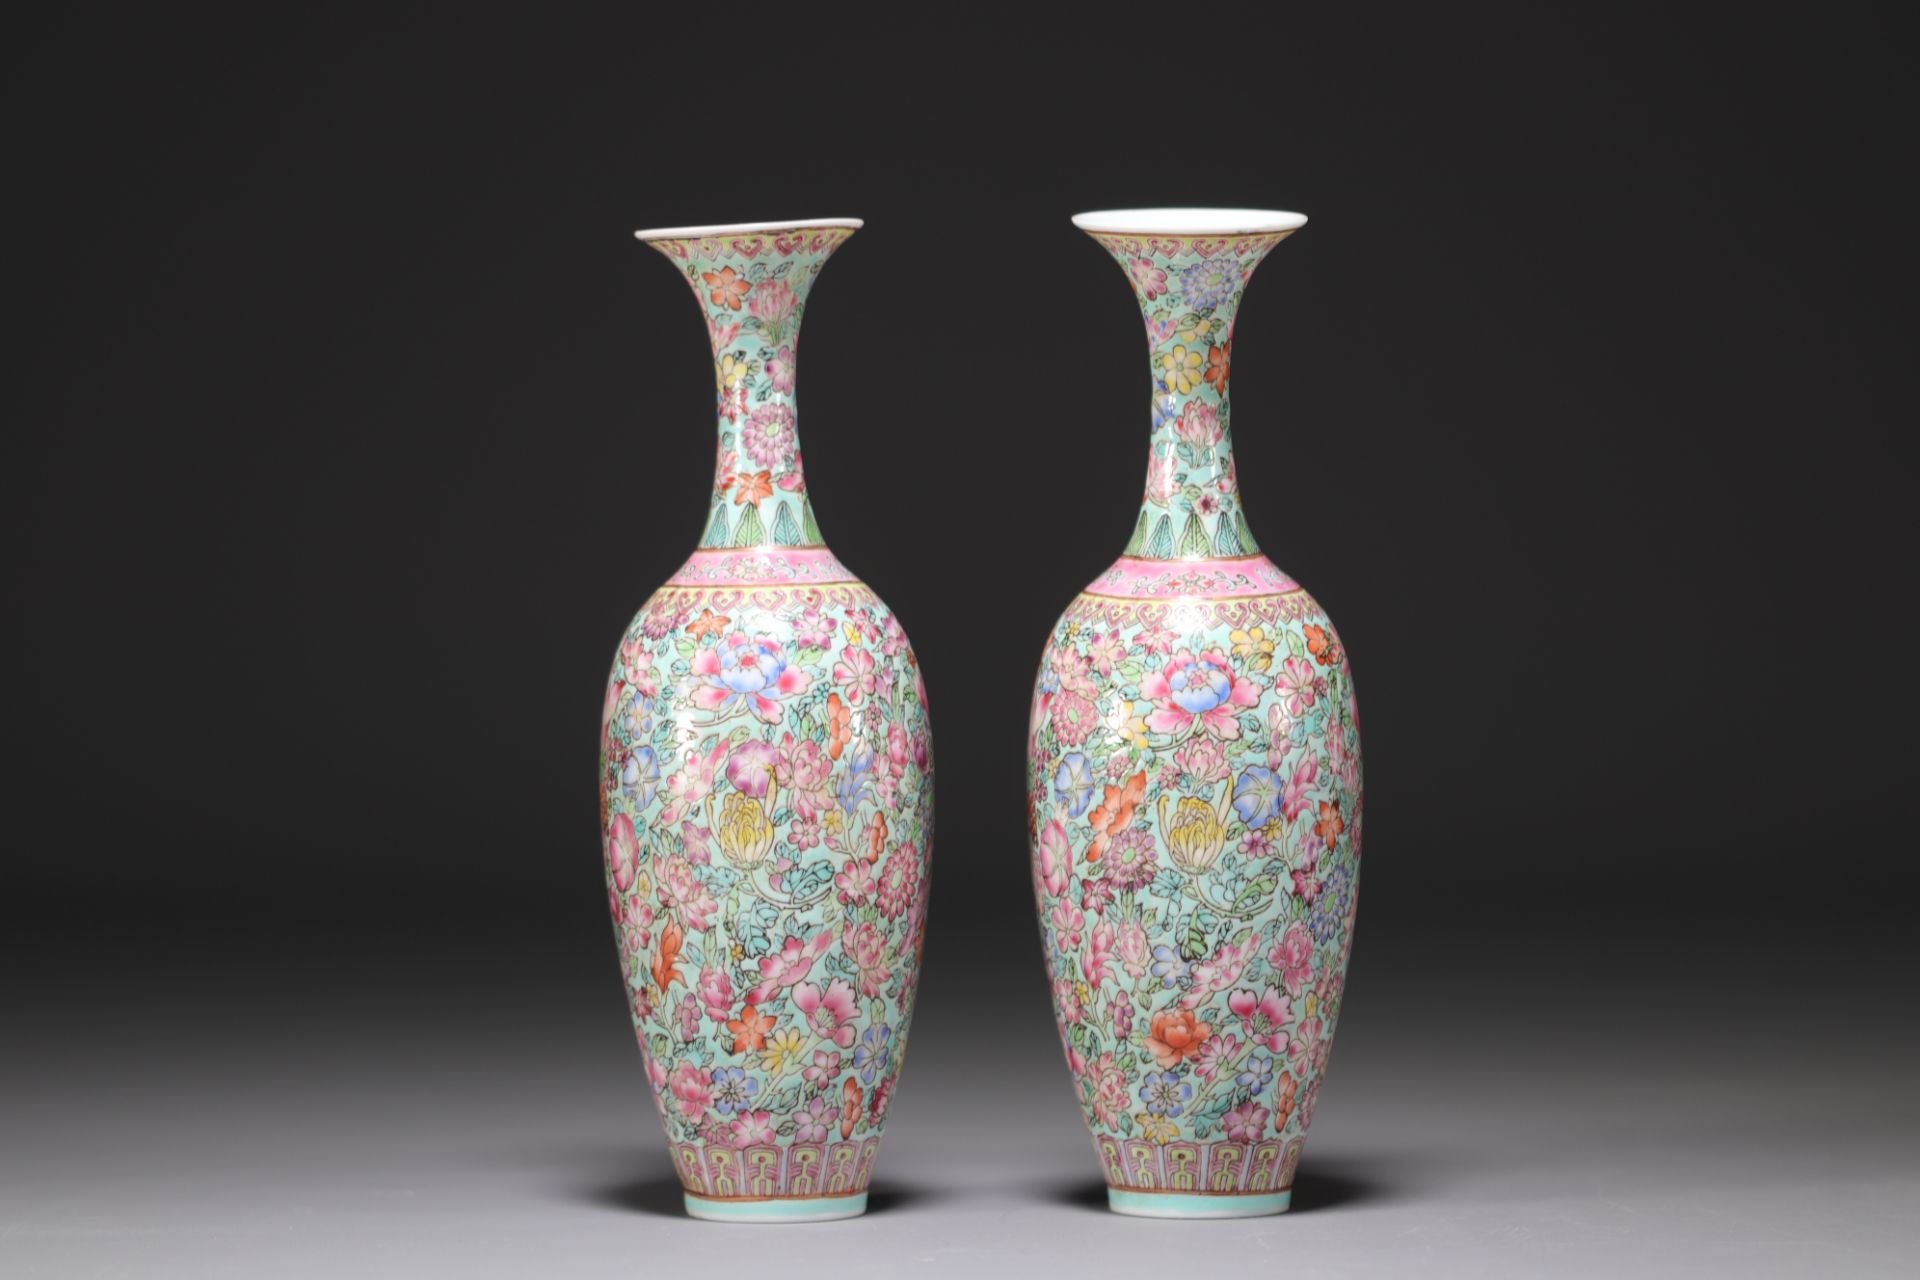 China - A pair of eggshell porcelain vases with floral decoration.